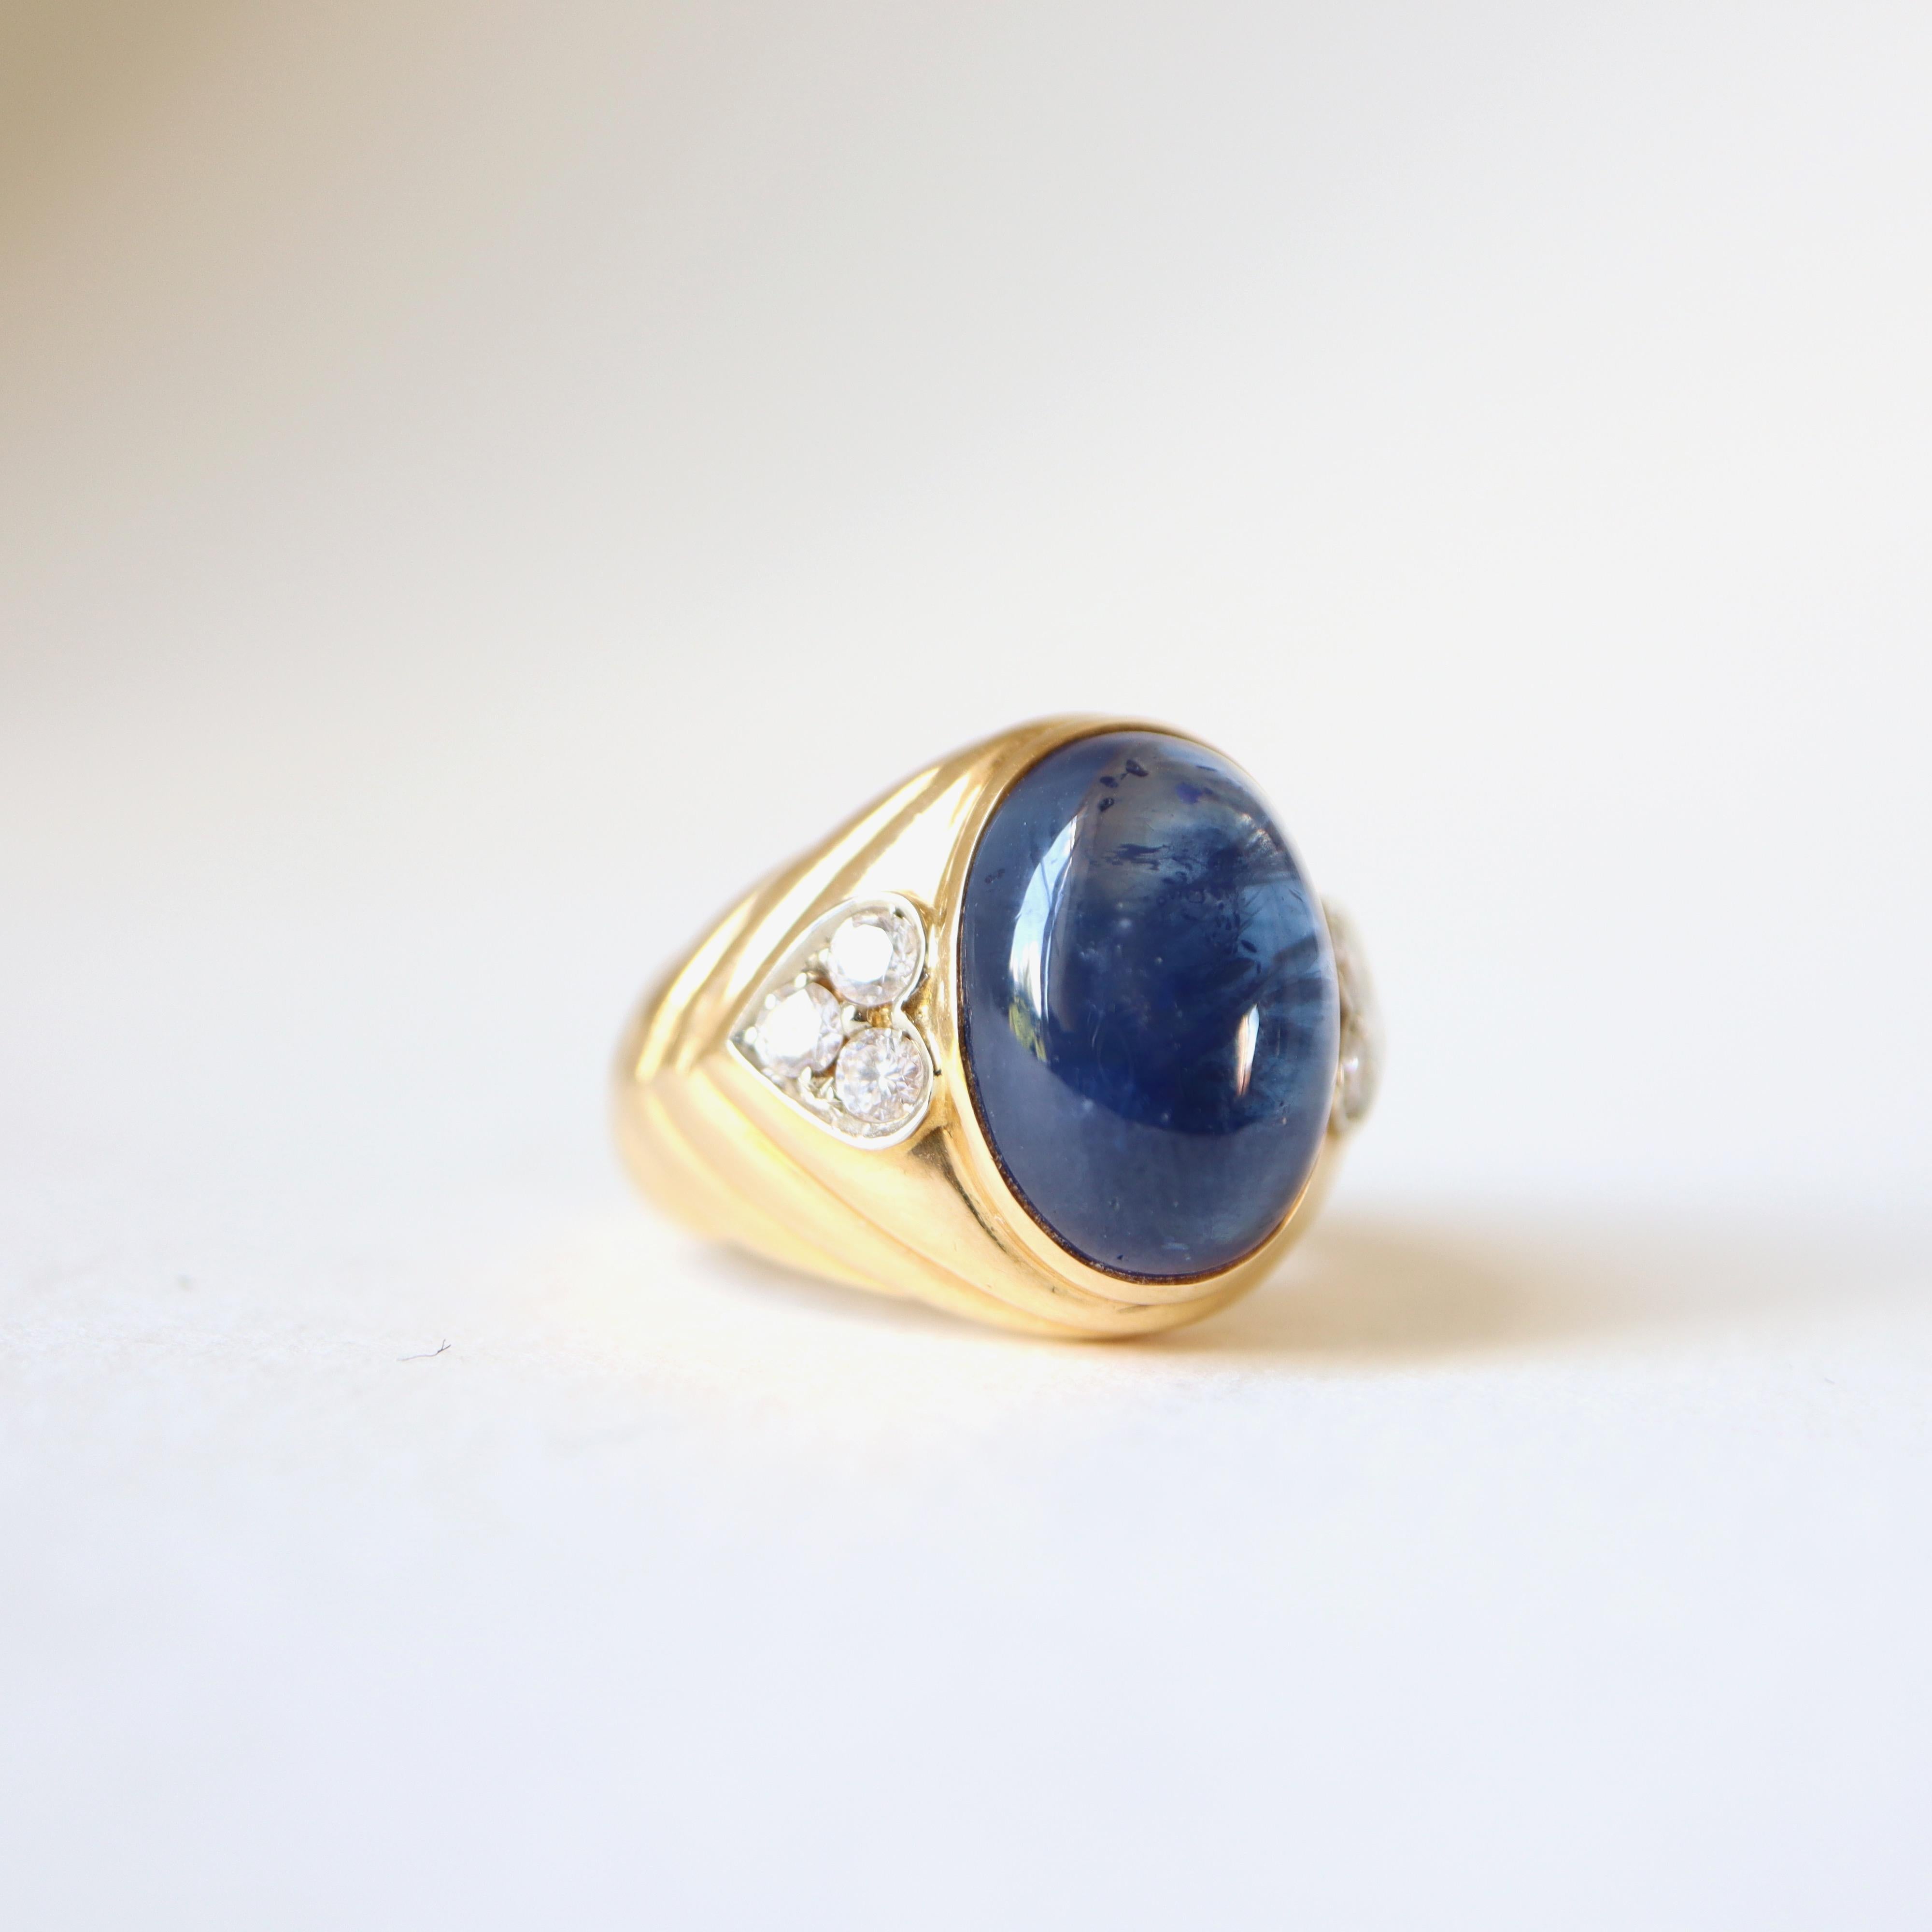 Cabochon Repossi 18 Kt Yellow Gold Ring 10 Carats Sapphire and Diamonds Hearts For Sale